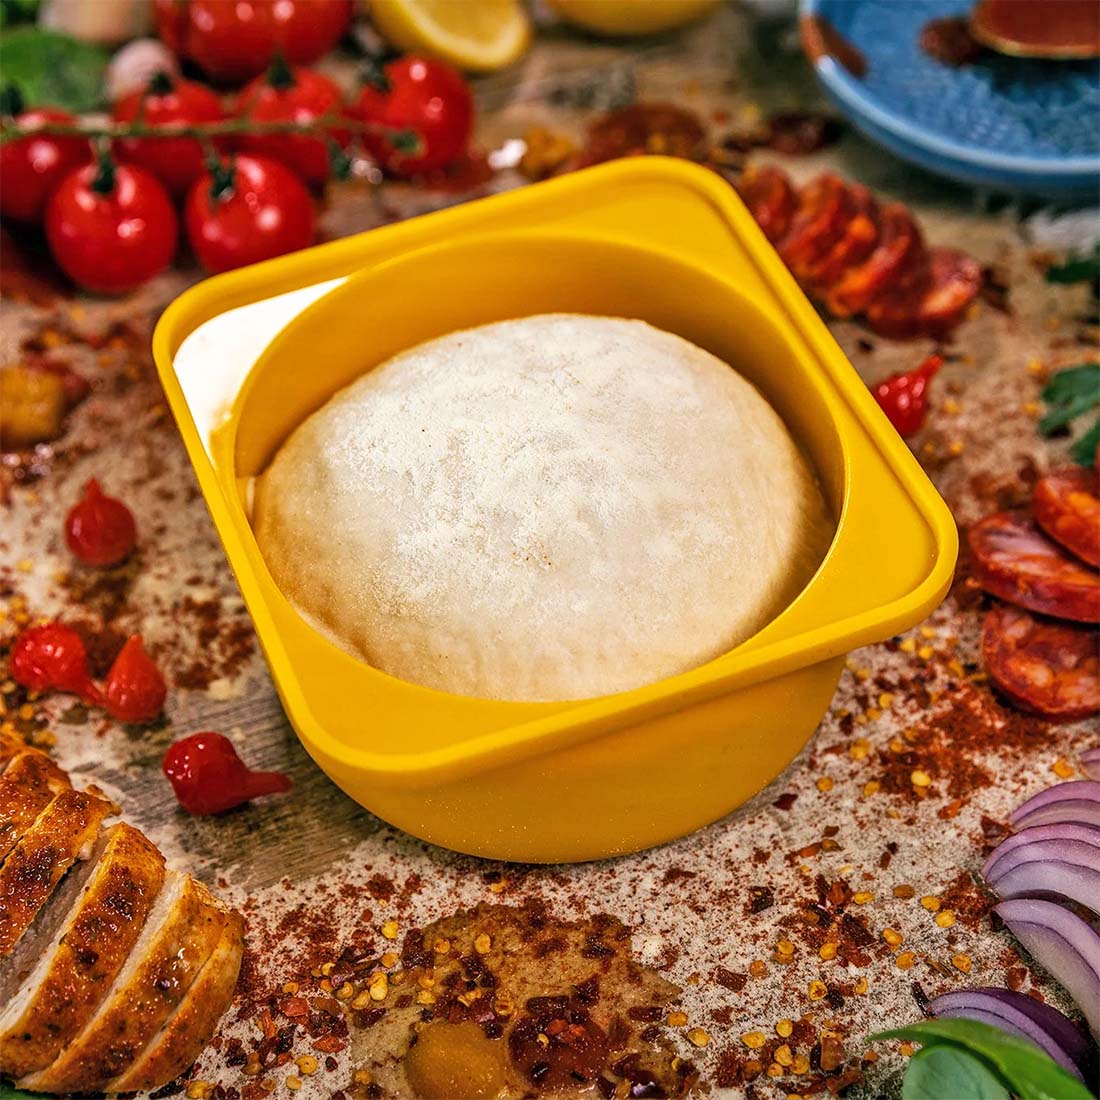 https://www.igneuswoodfiredovens.com/wp-content/uploads/2023/03/Babadoh-Dough-Prooving-Container-set-of-6-pizza-oven-accessories-yellow-colour-3.jpg